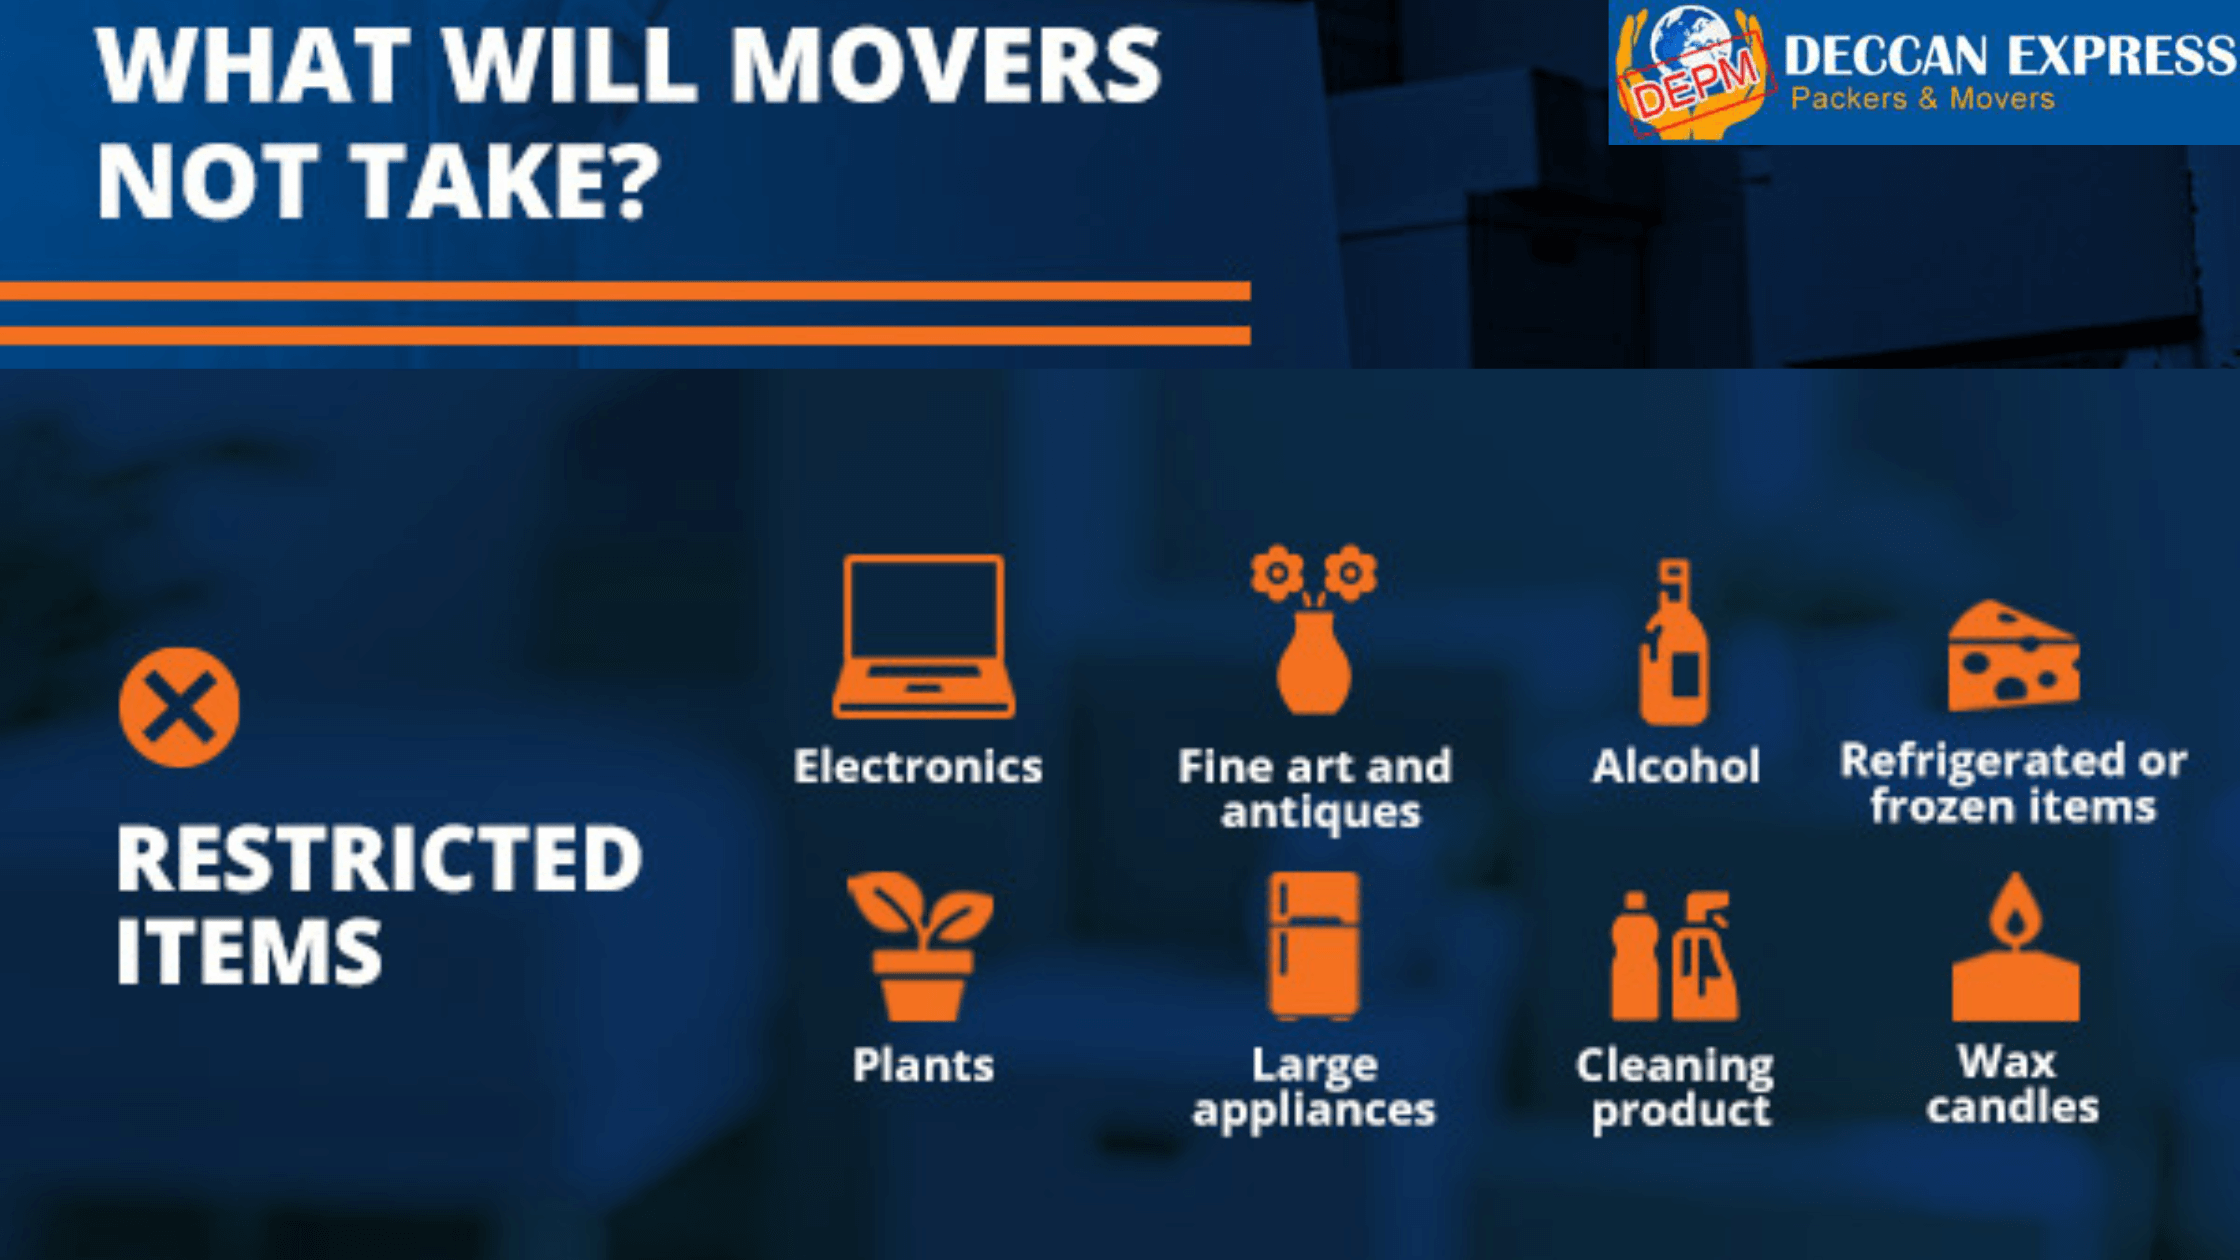 Understanding Excluded Items for Movers’ Transport